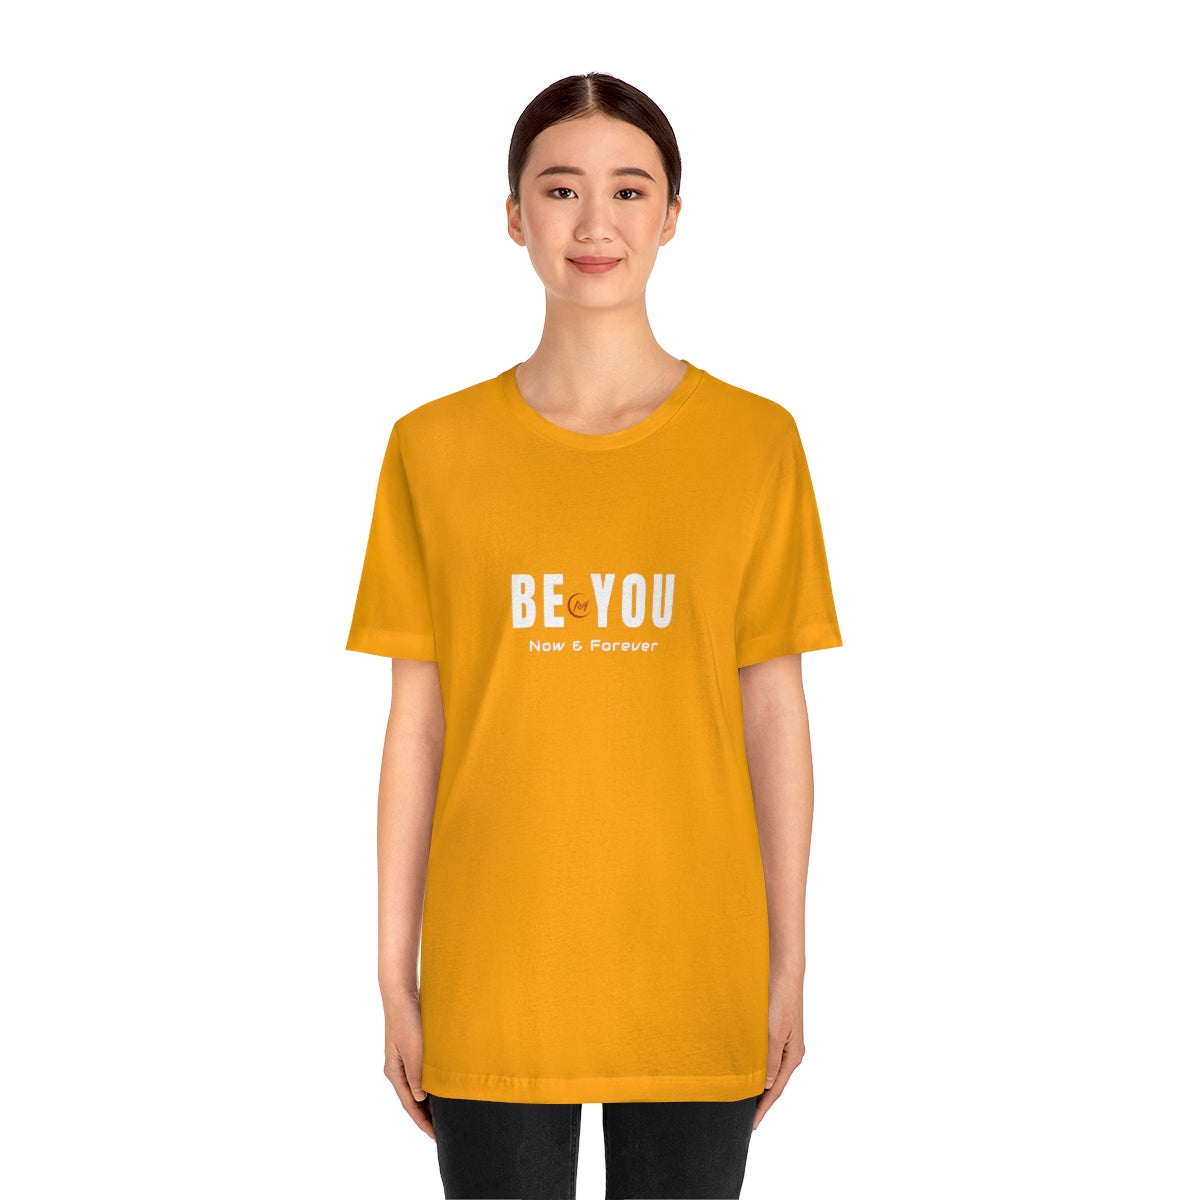 New! Be You (Now and Forever) Unisex Short Sleeve Tee